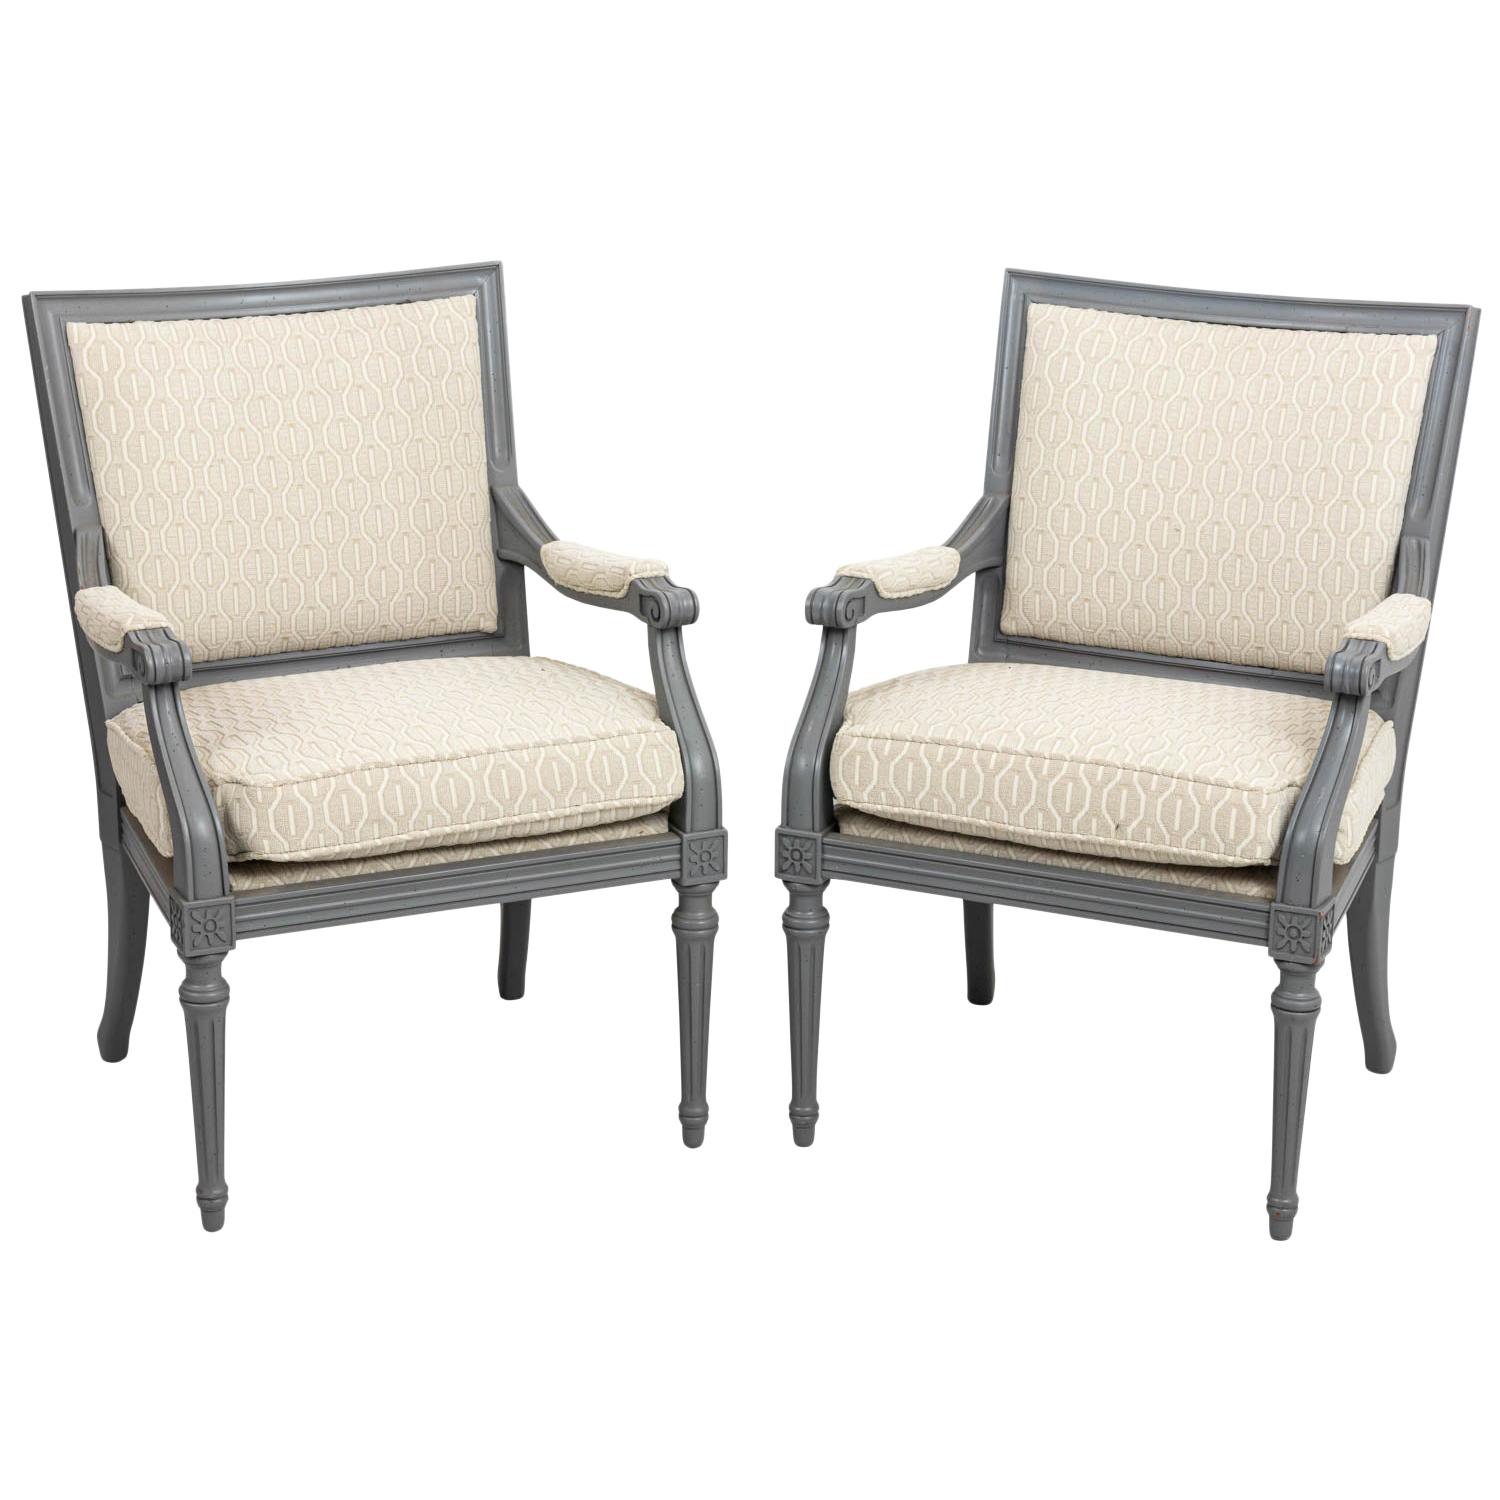 Pair of Upholstered French Directoire Style Armchairs